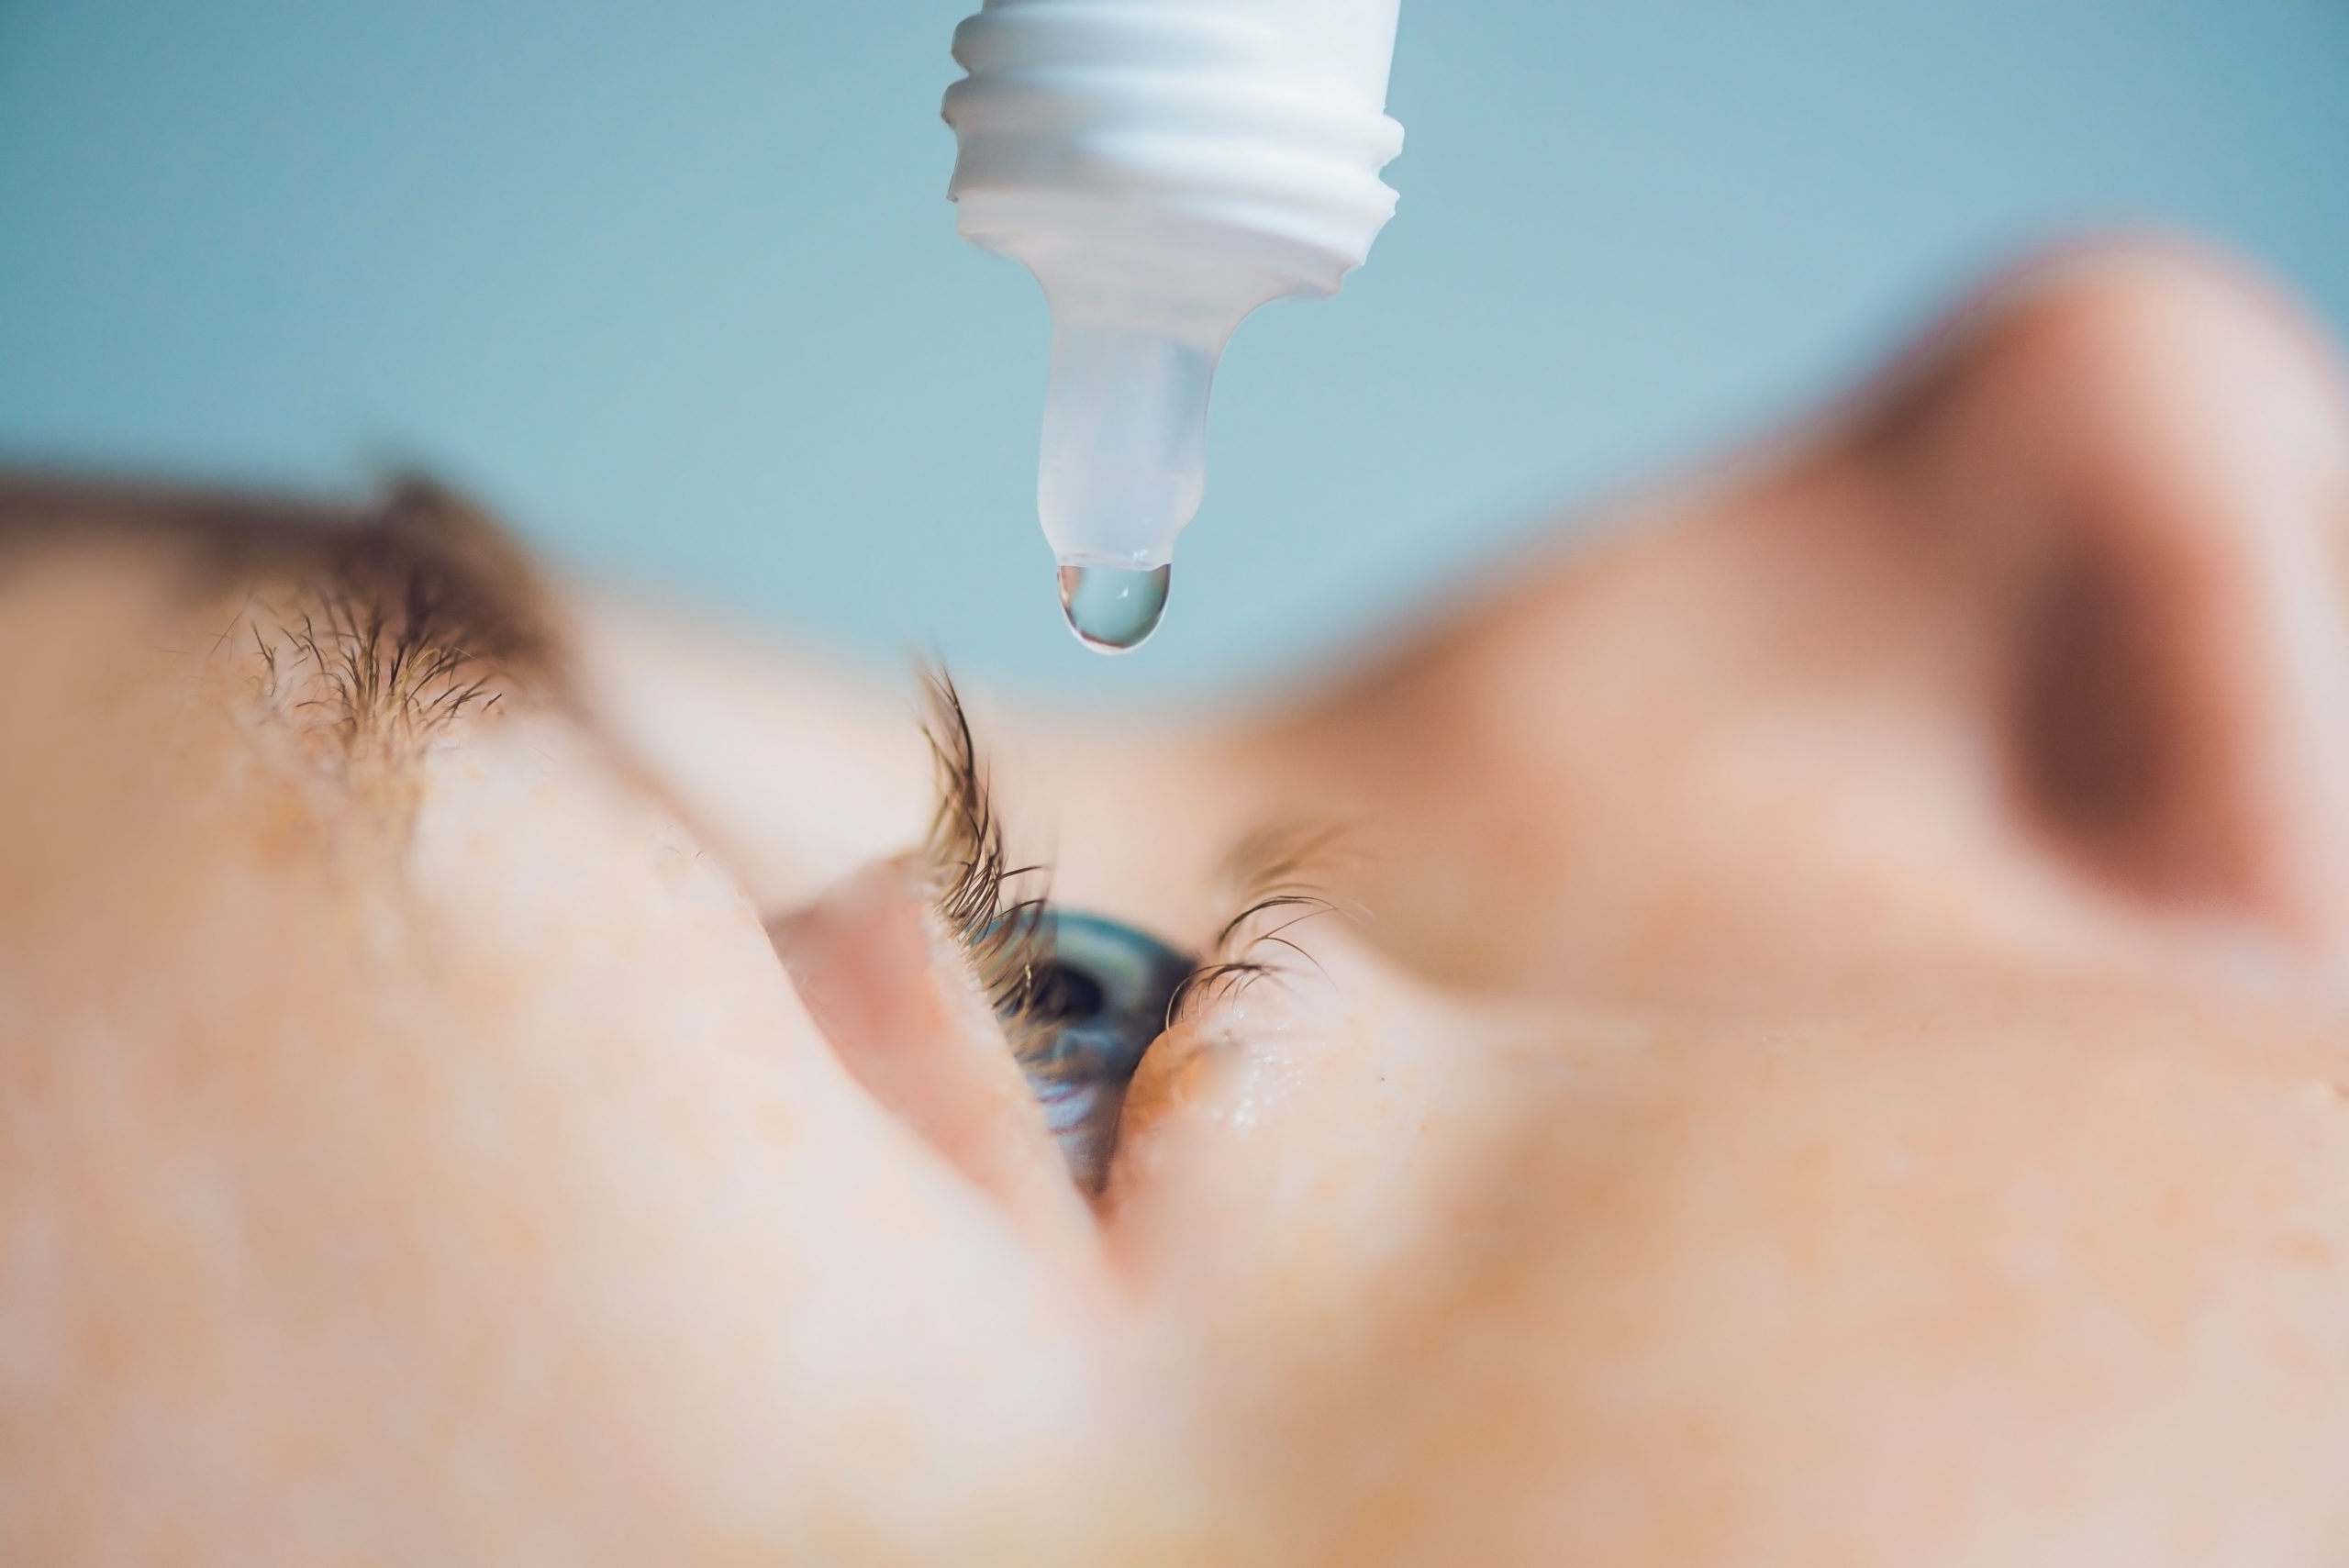 Allergies and Dry Eyes: What's the Difference? | SureVision Eye Centers